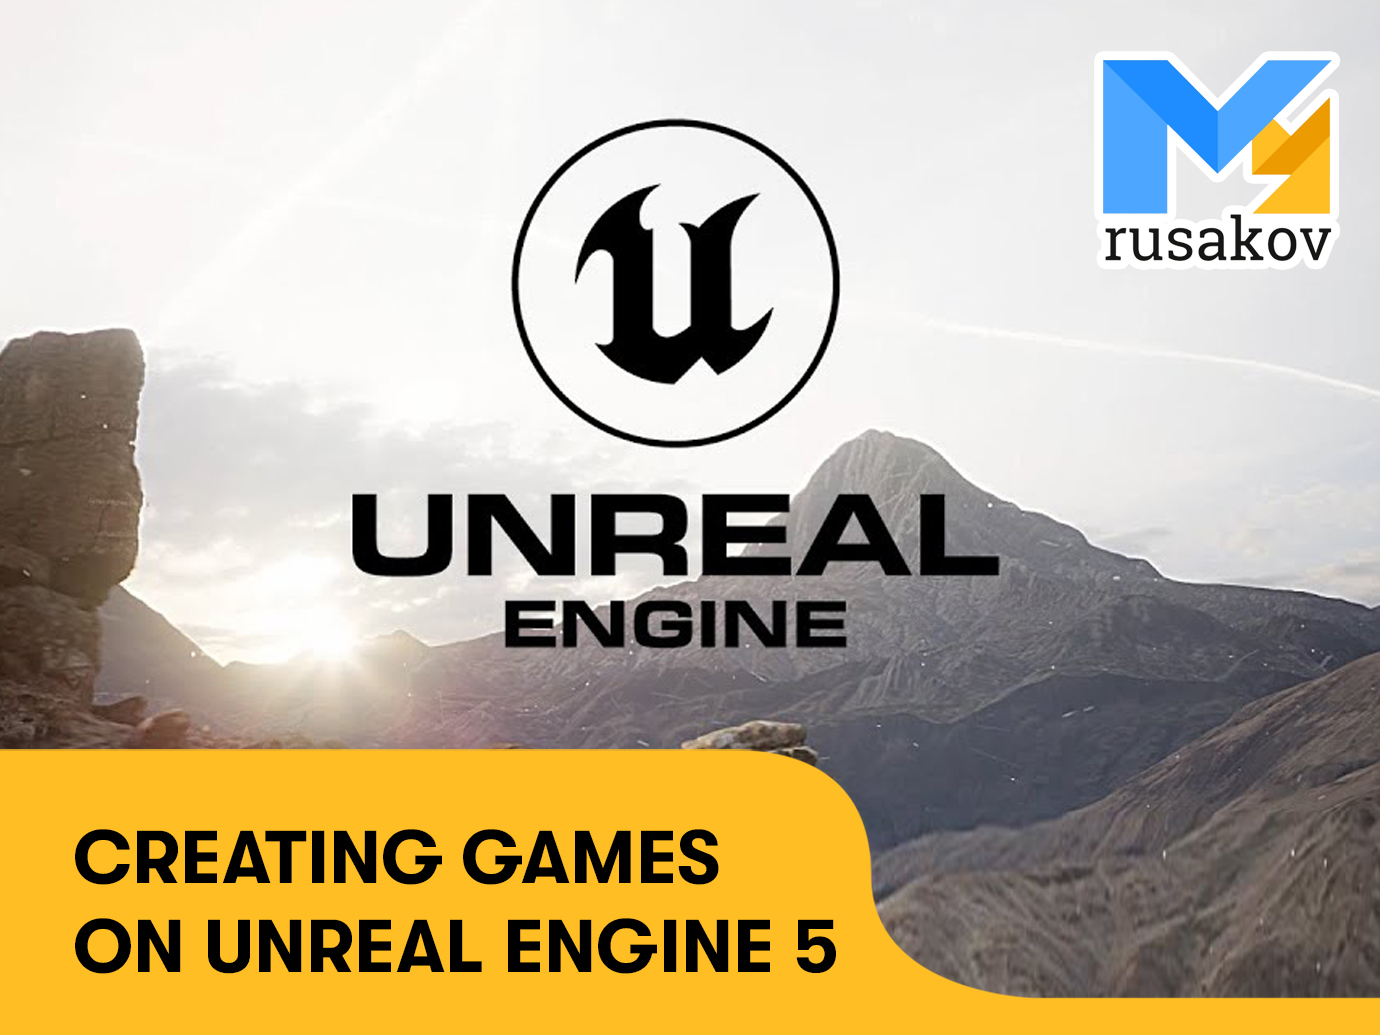 Creating games on Unreal Engine 5